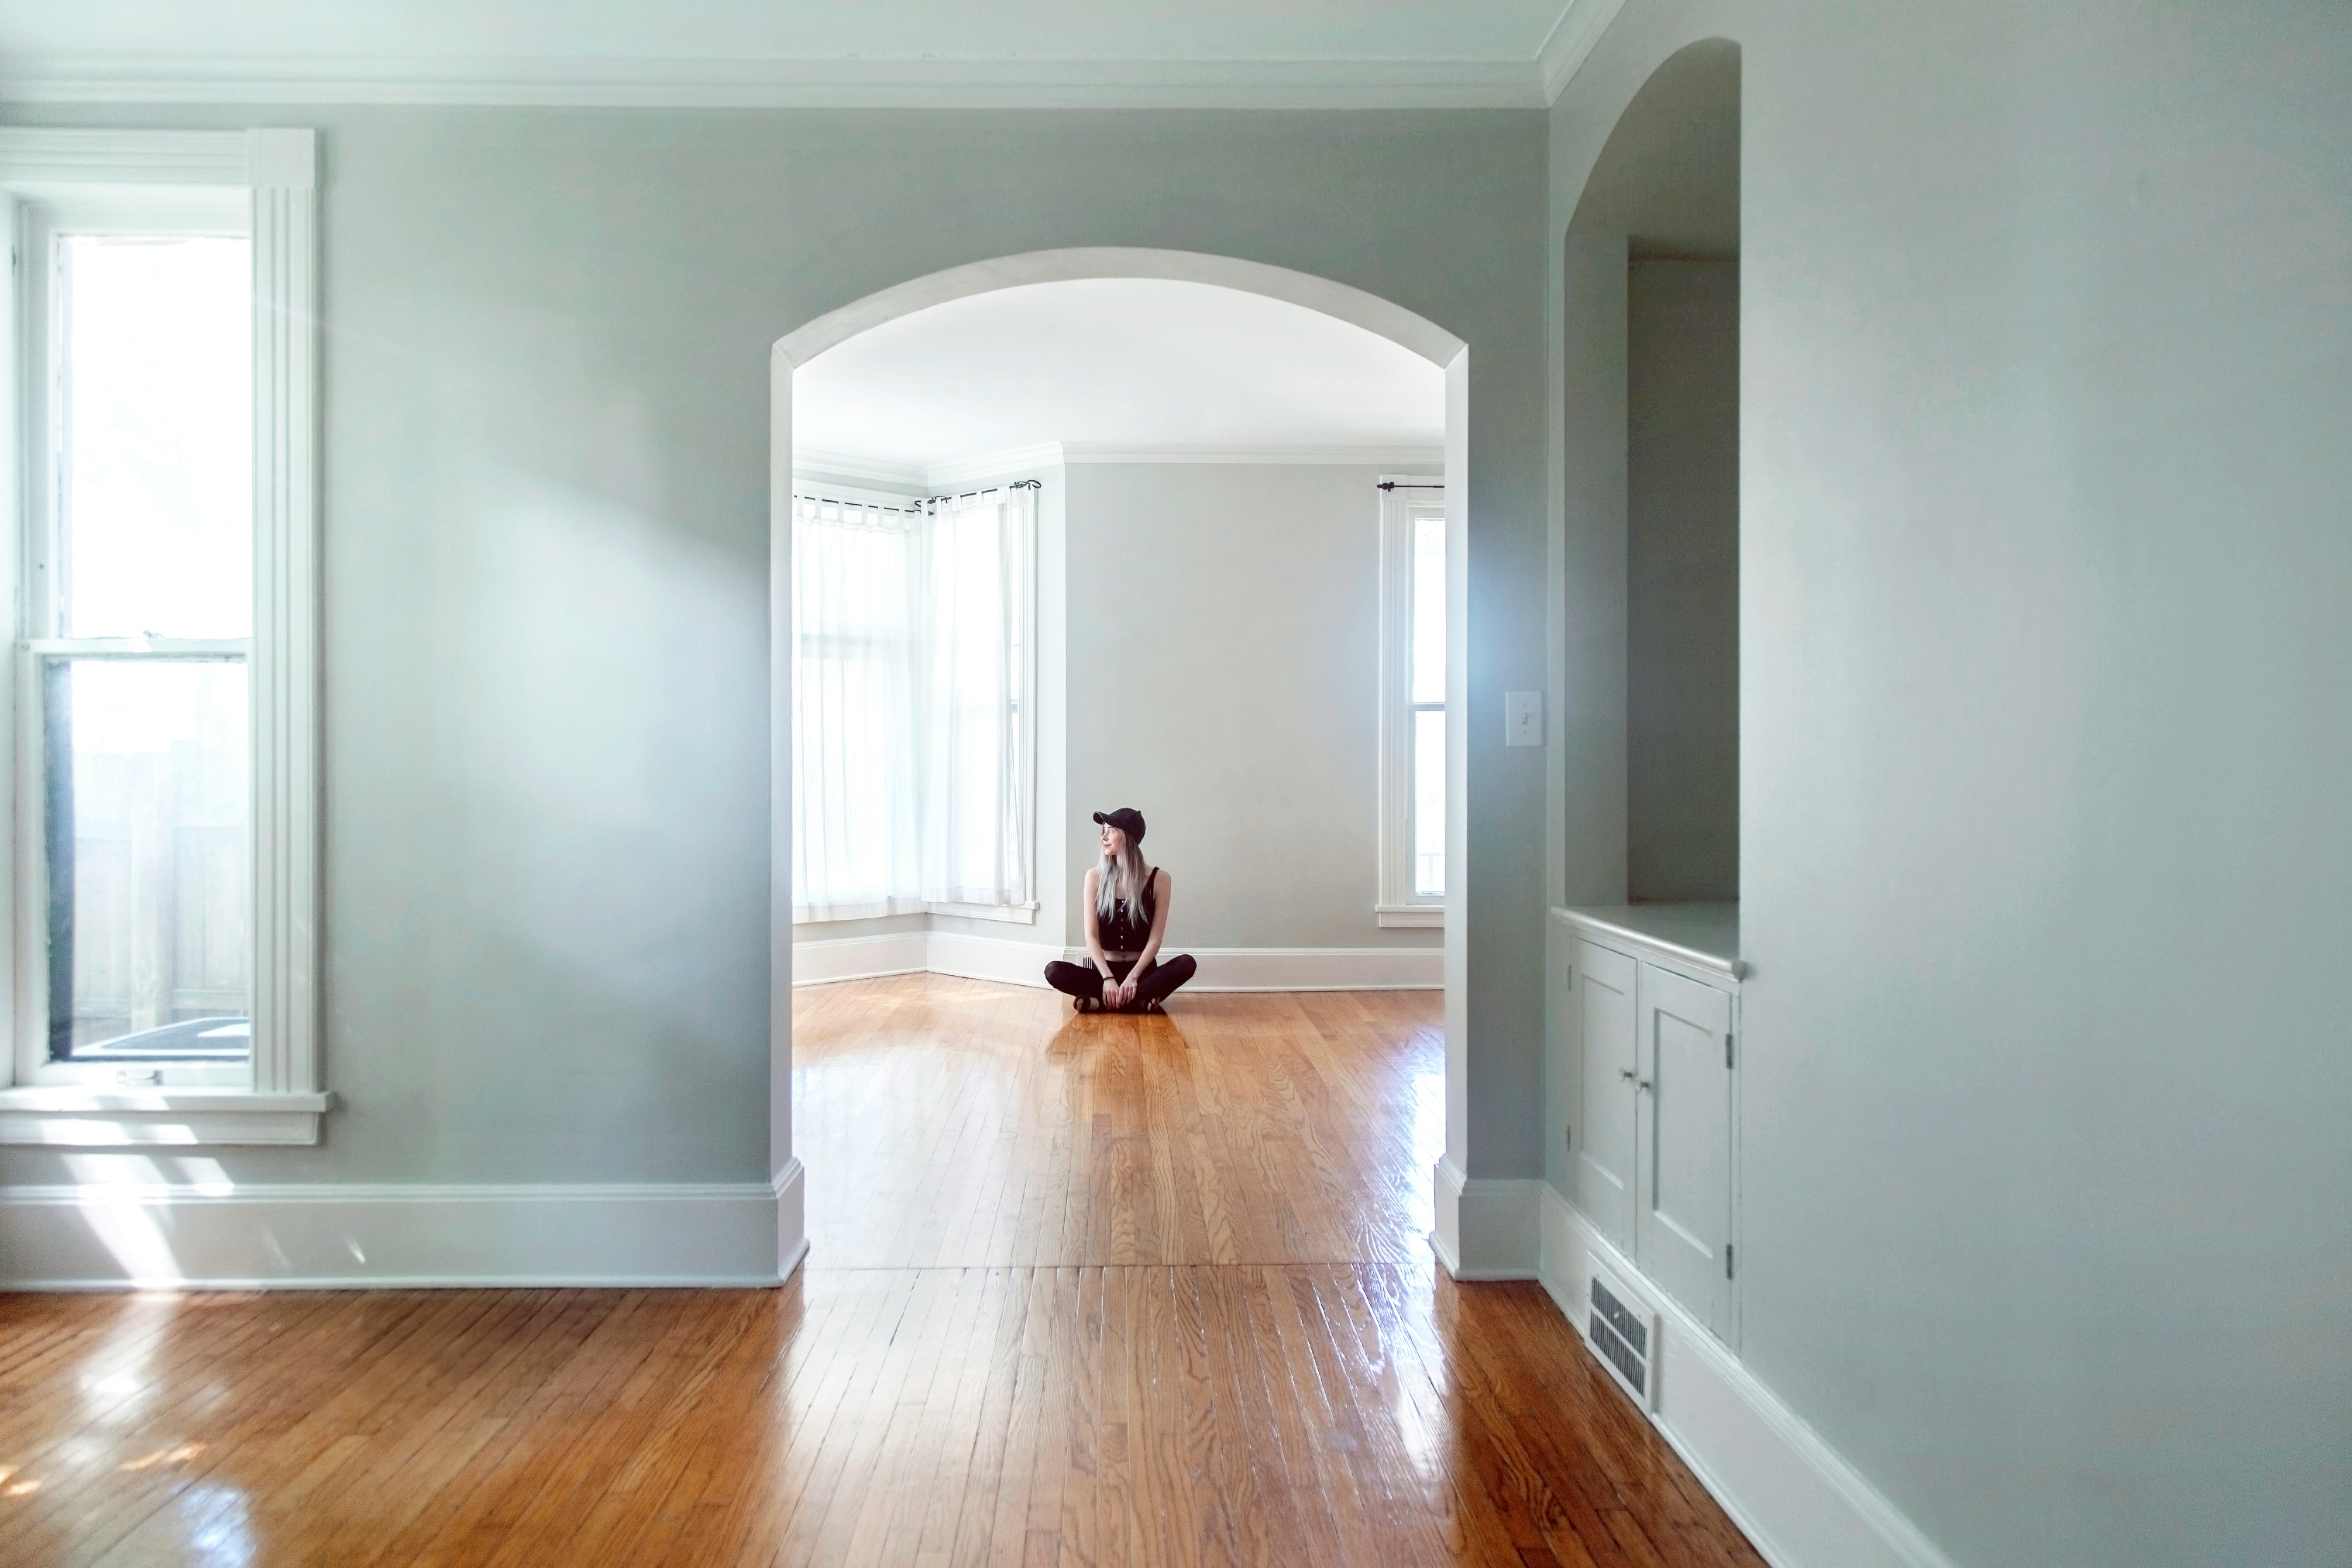 A woman in an empty house | Source: Unsplash